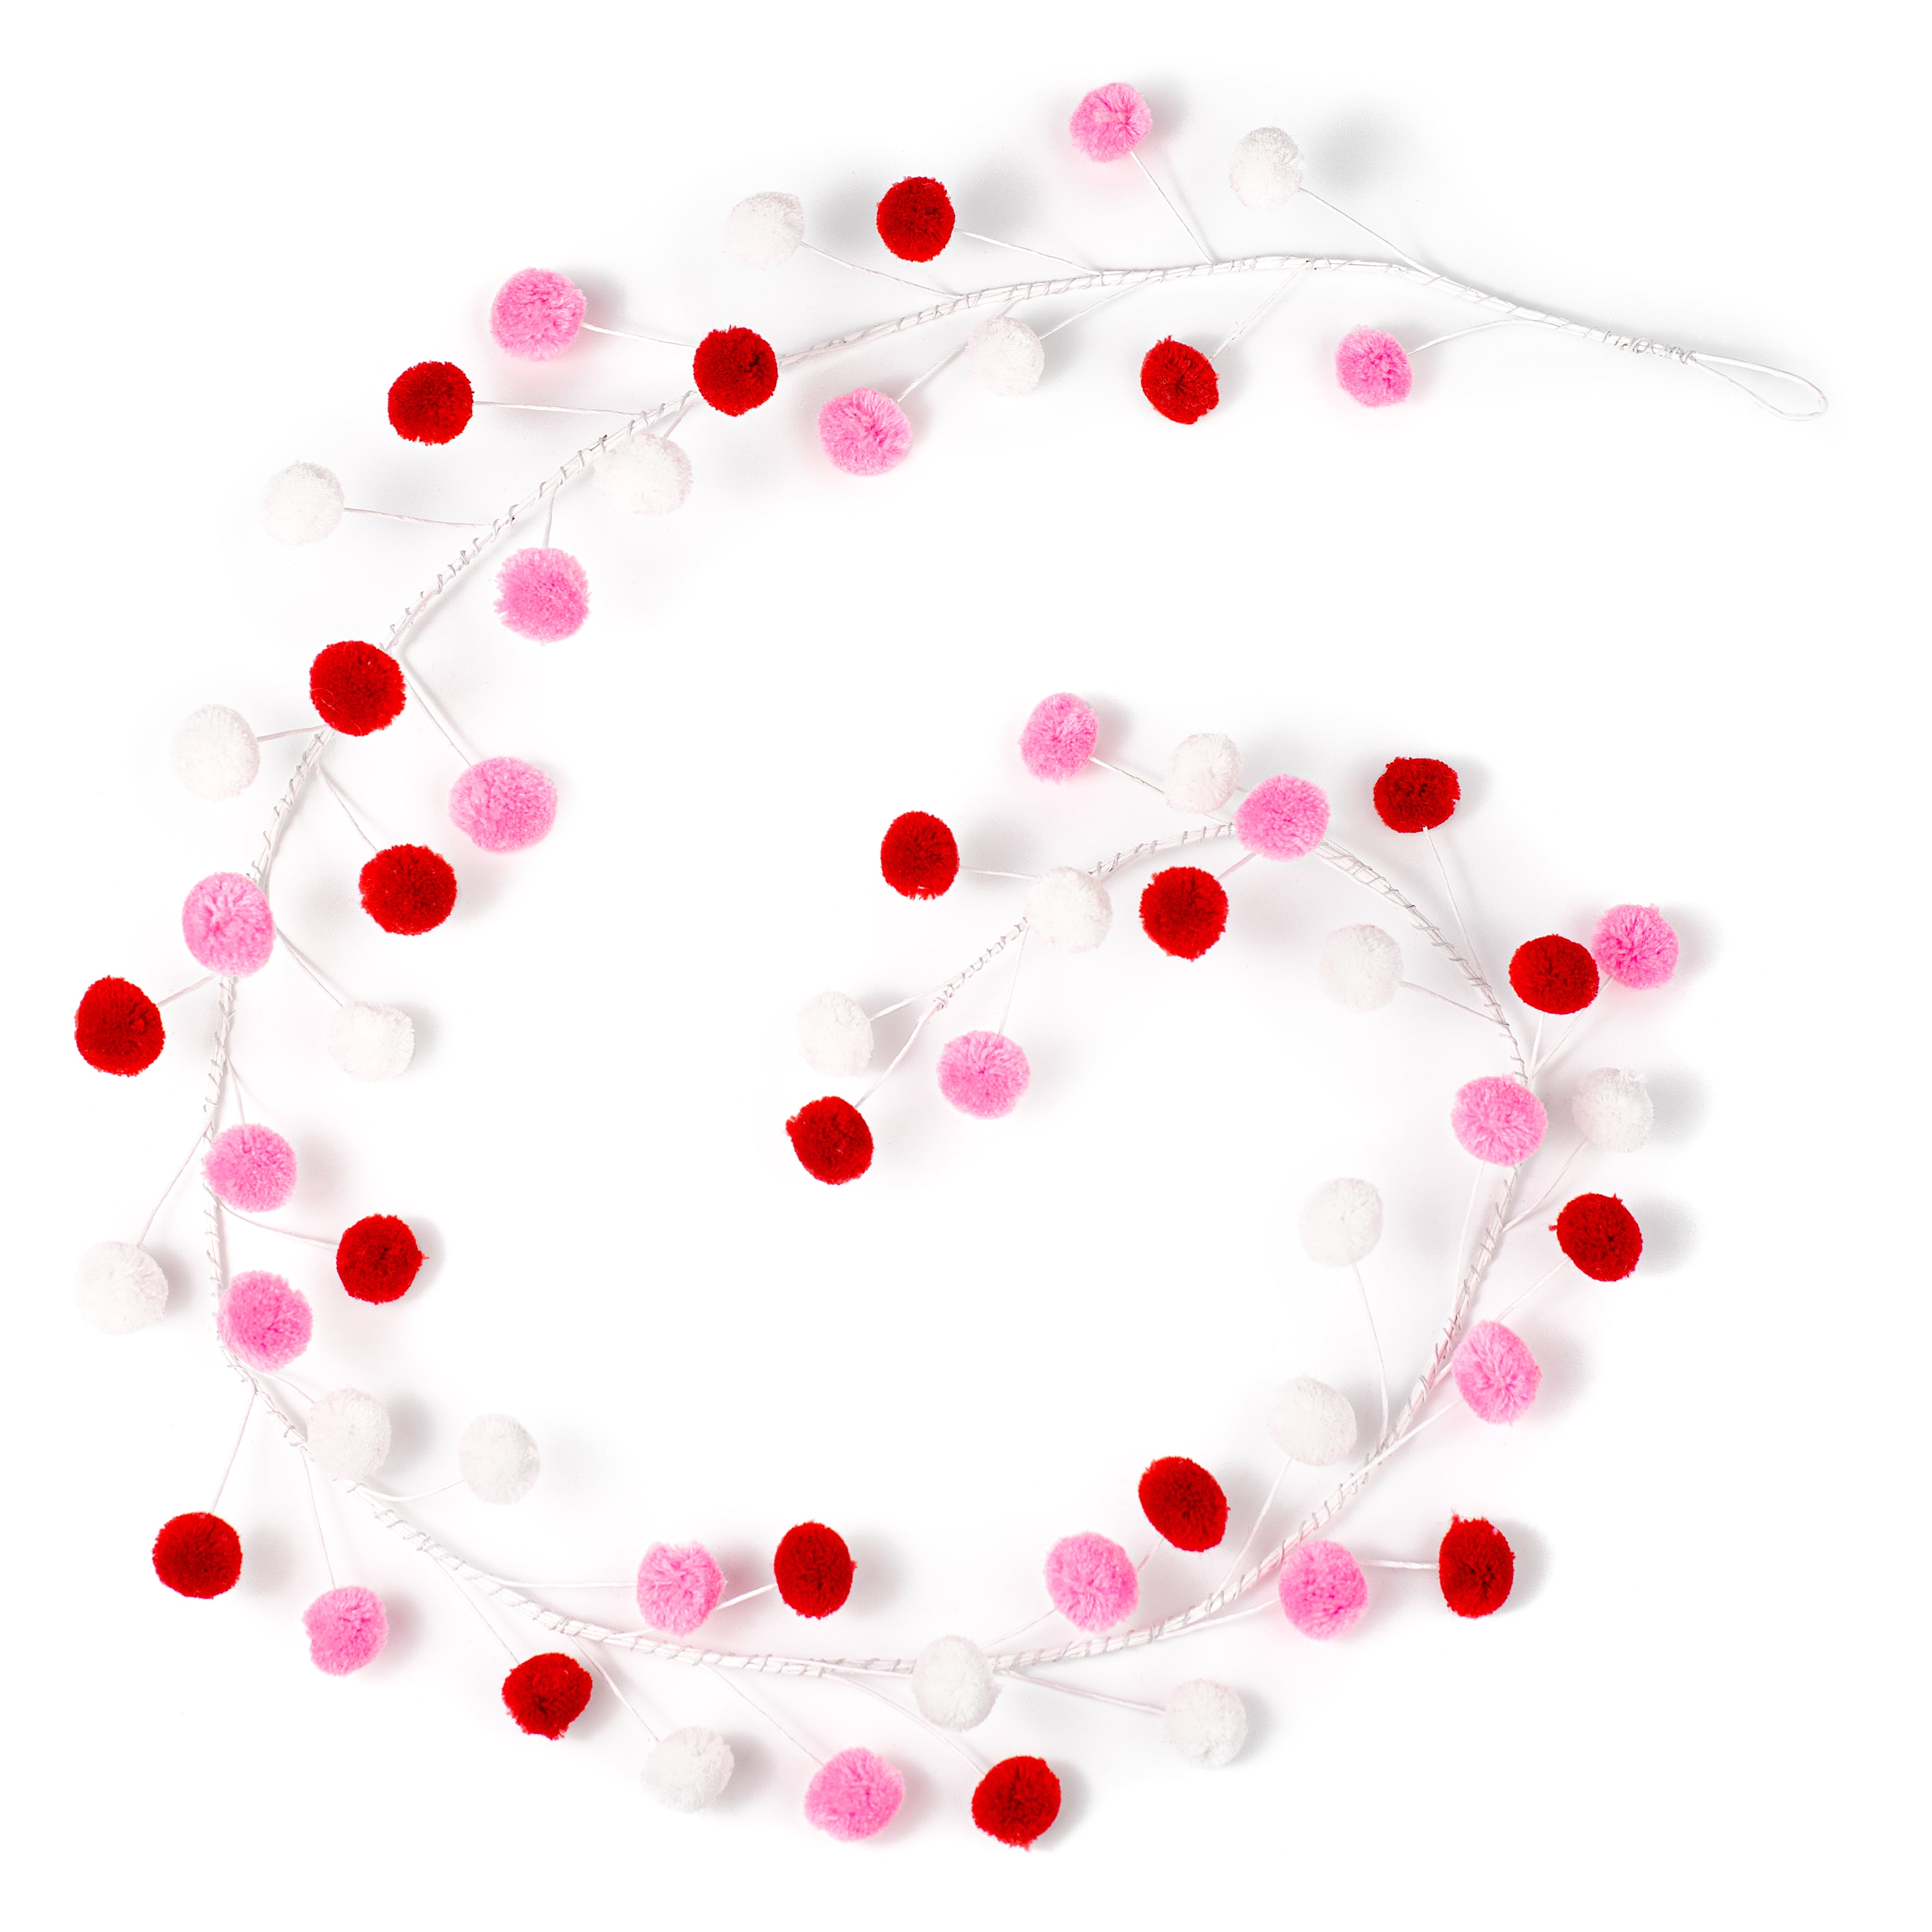 5' 3-Color Pom Pom Wire Garland: Red, White, Pink